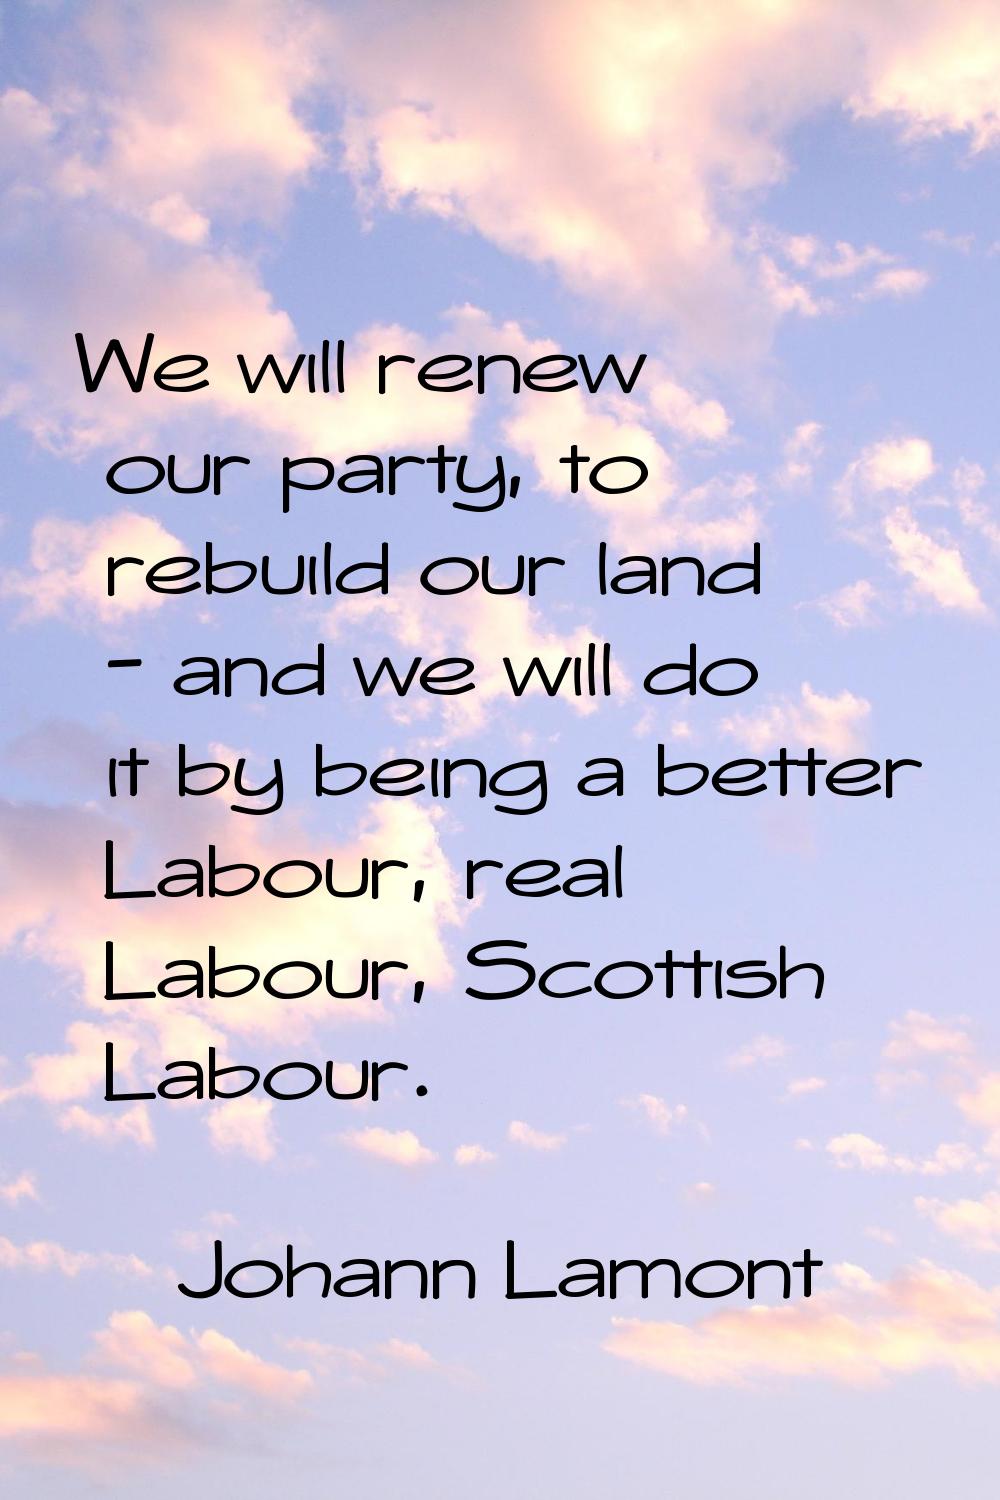 We will renew our party, to rebuild our land - and we will do it by being a better Labour, real Lab